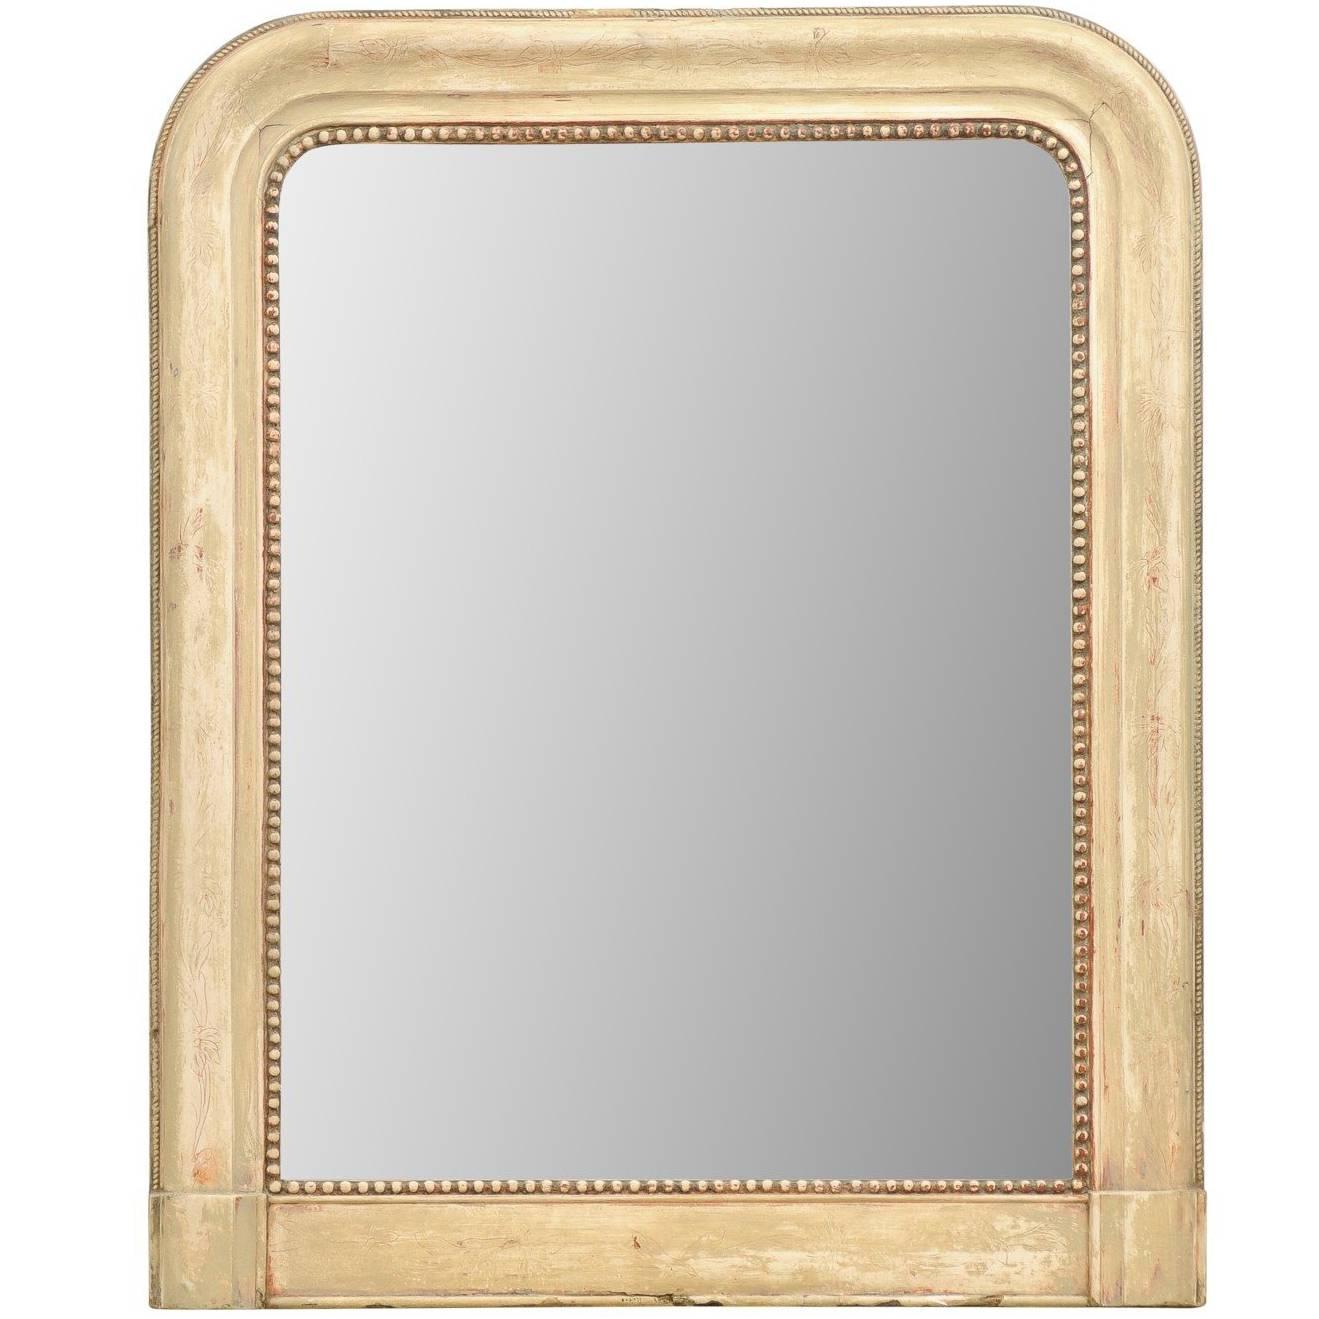 French Louis Philippe Mirror in Cream Color with Bead-Like and Flower Surround